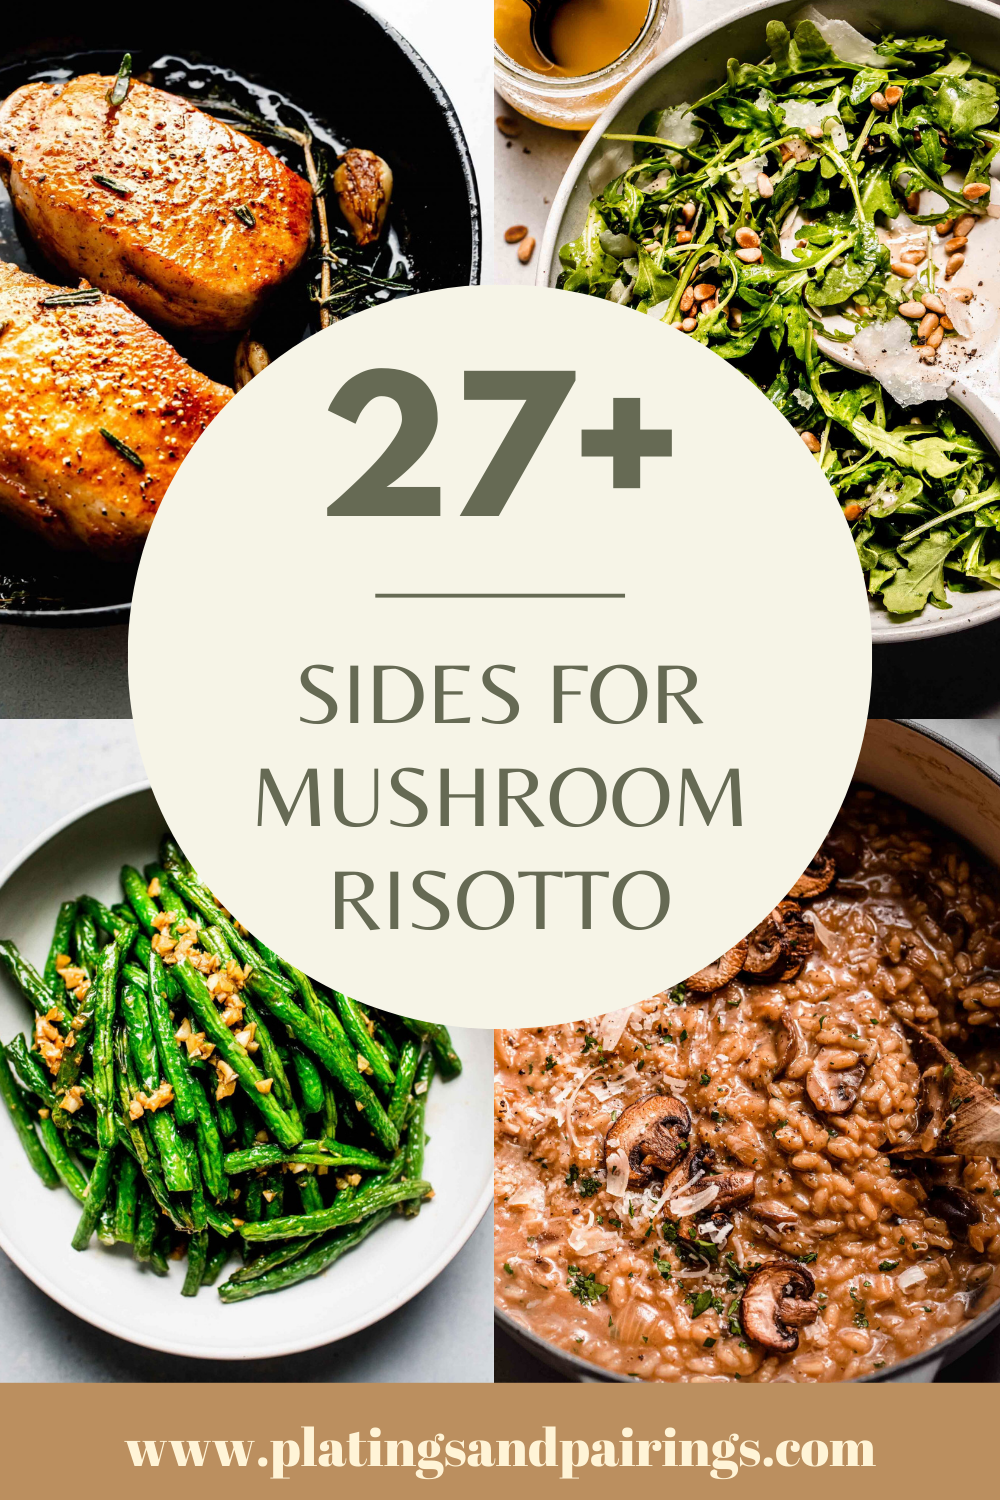 Collage of side dishes for mushroom risotto with text overlay.